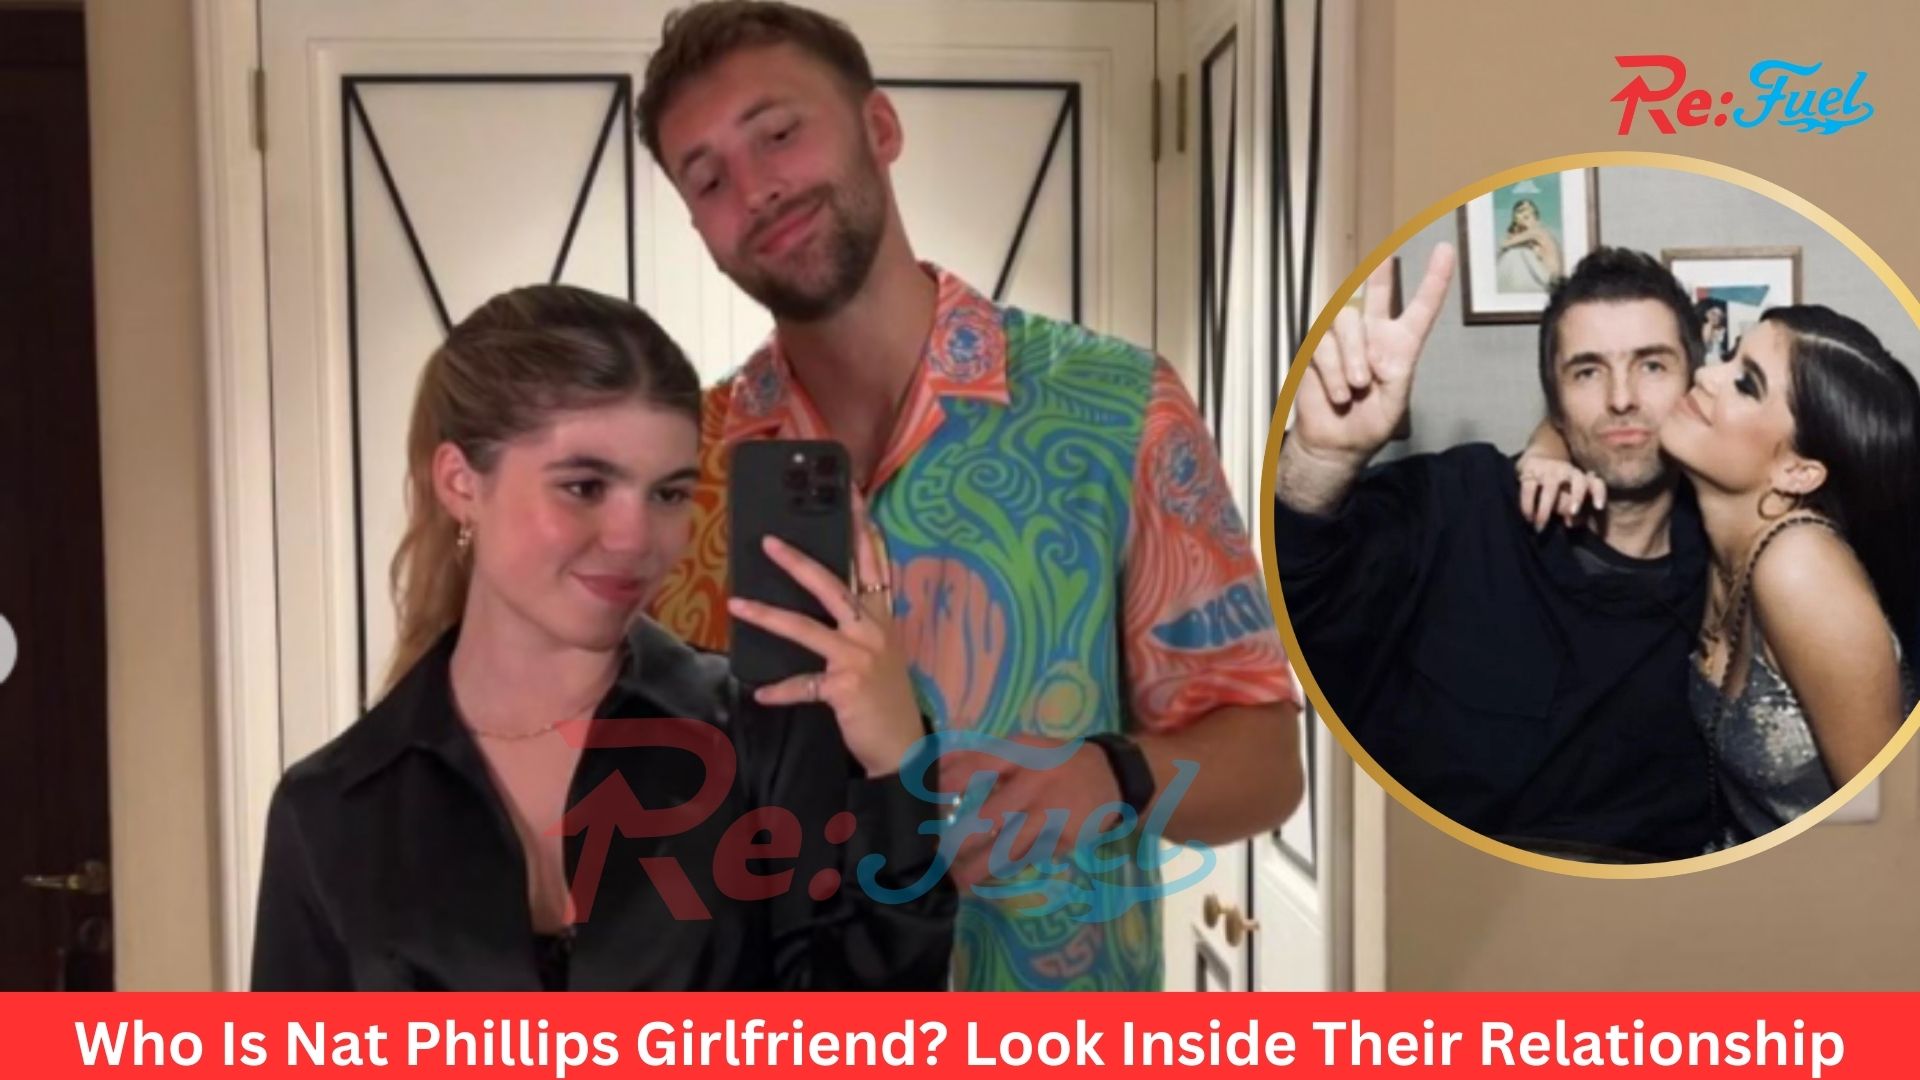 Who Is Nat Phillips Girlfriend? Look Inside Their Relationship